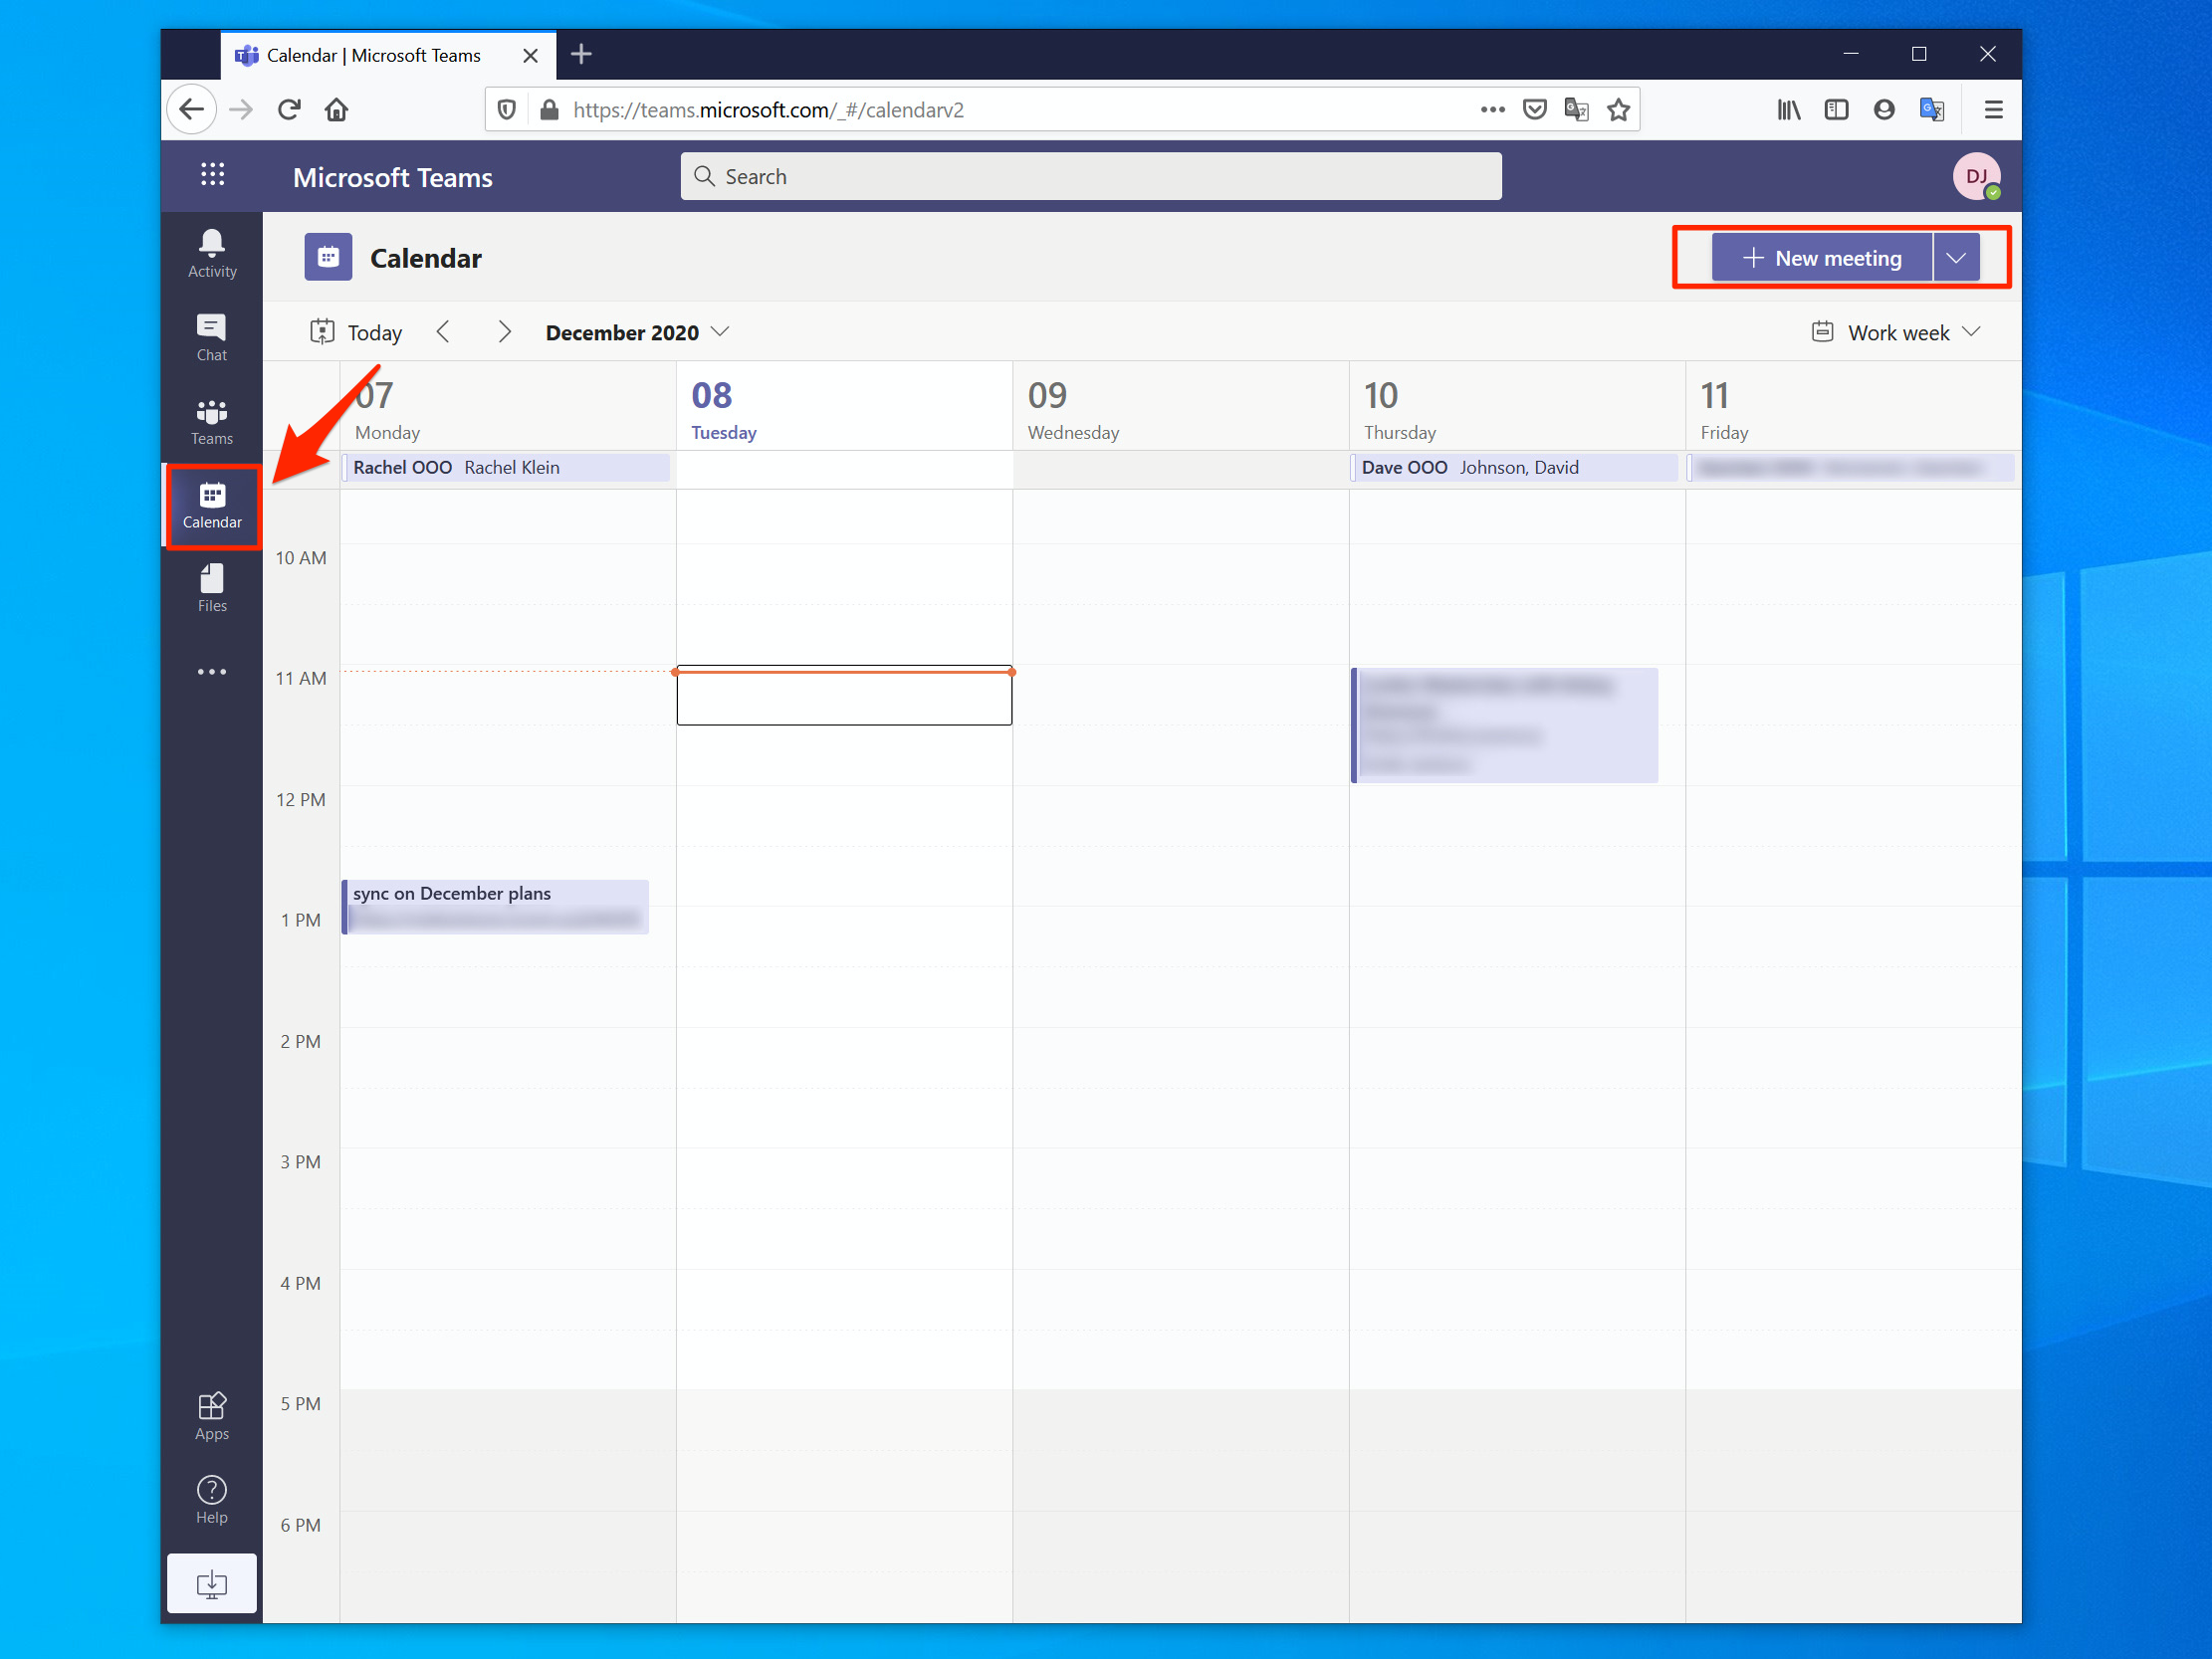 How to set up a Microsoft Teams meeting using a computer or mobile device